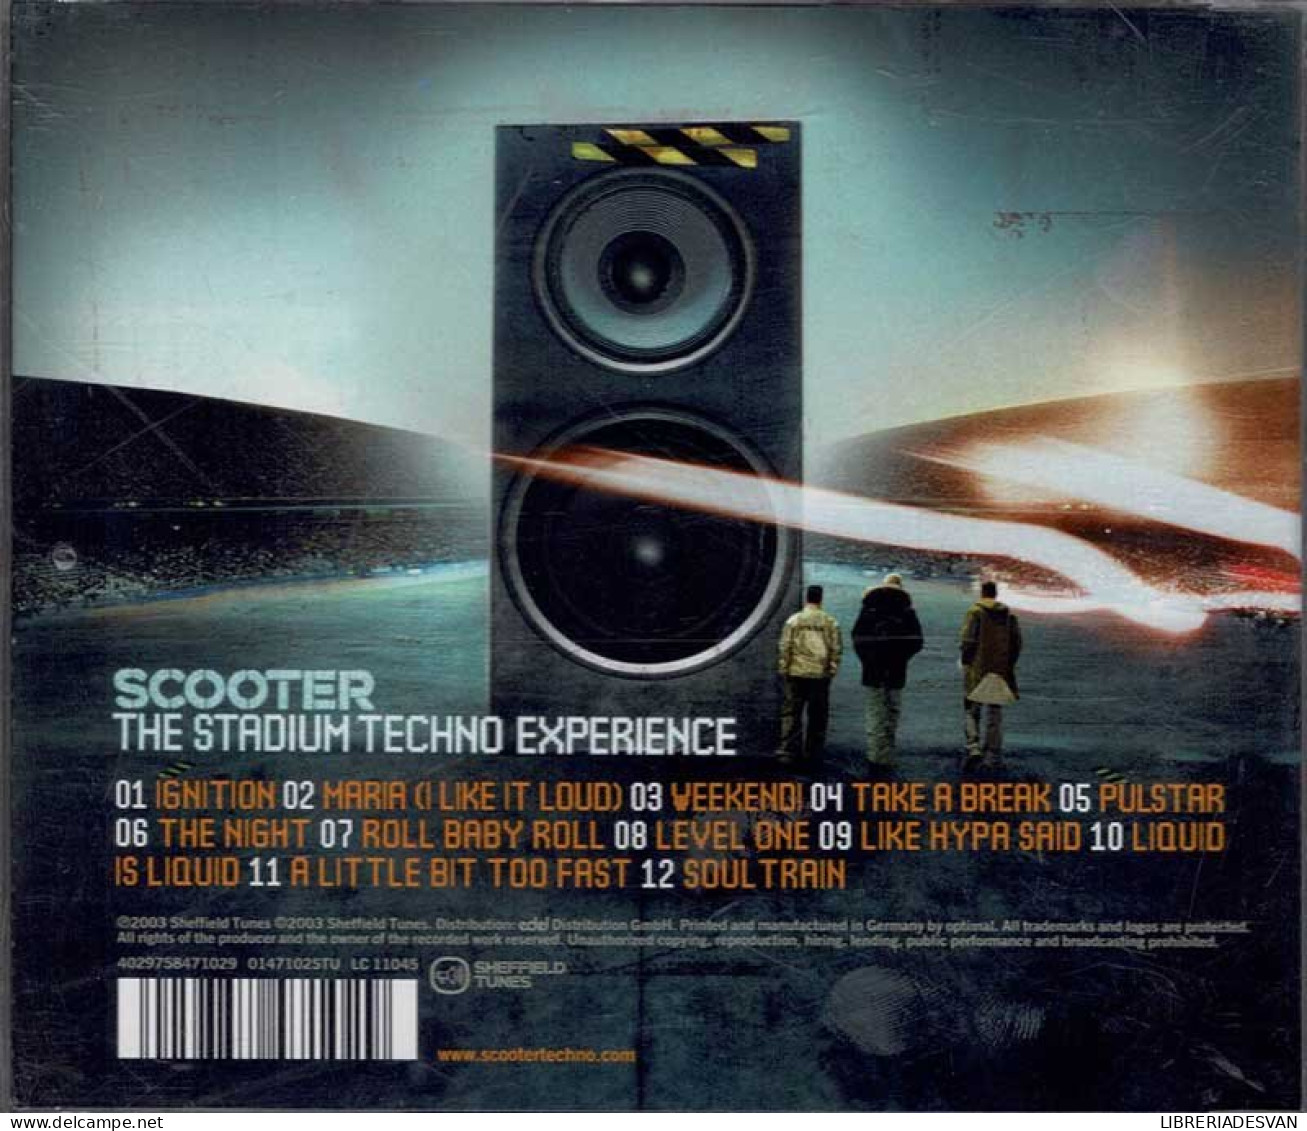 Scooter - The Stadium Techno Experience. CD - Dance, Techno & House